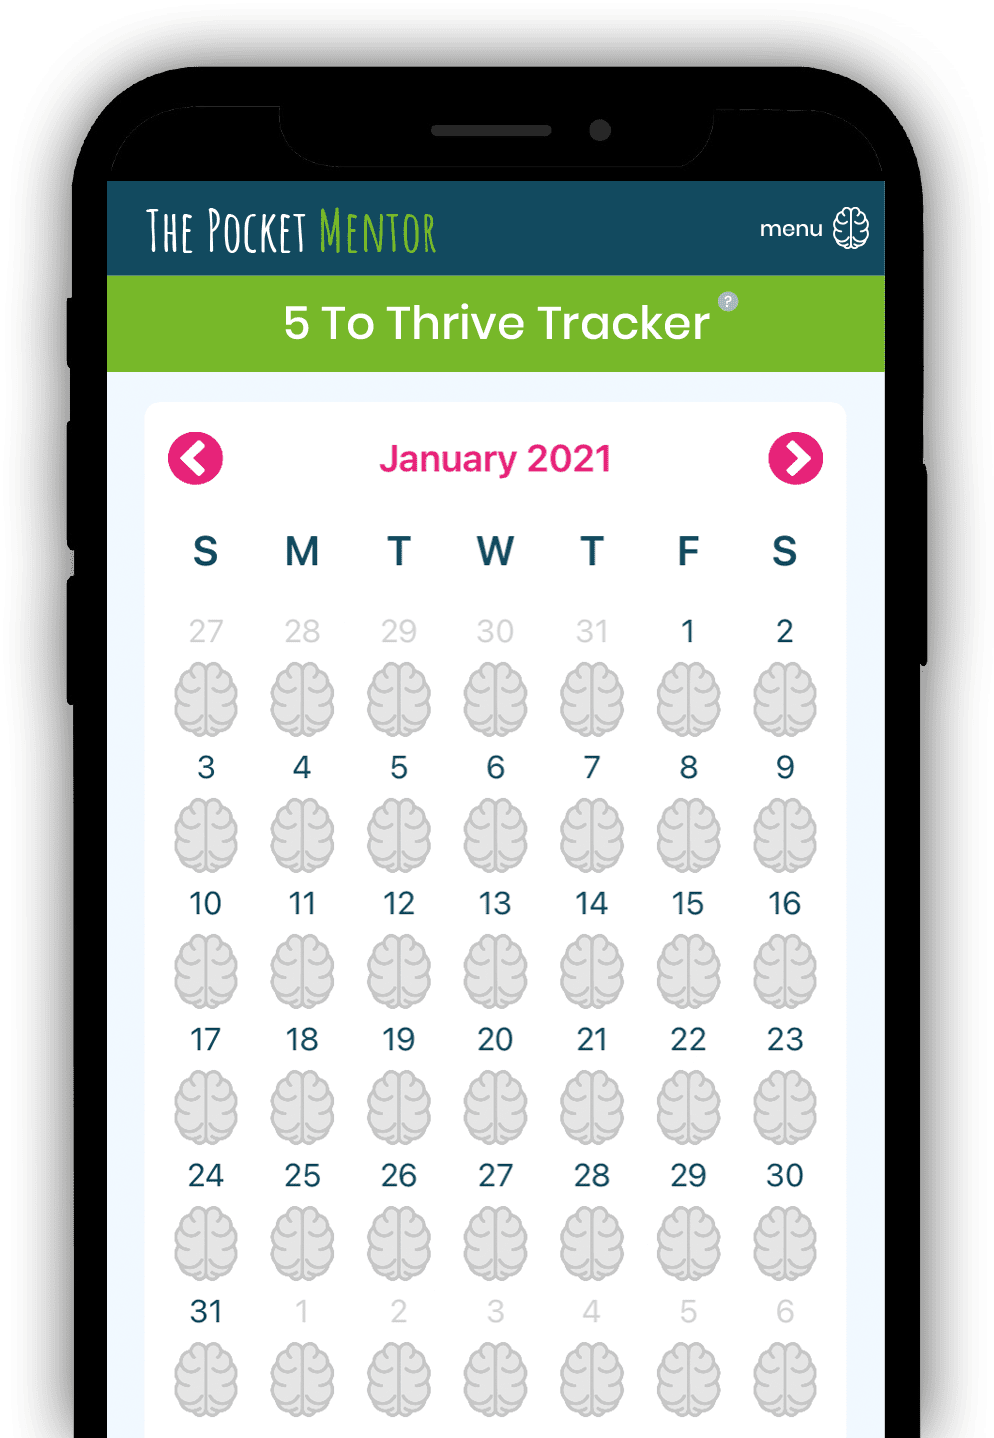 Track your mental strength progress and tree growth